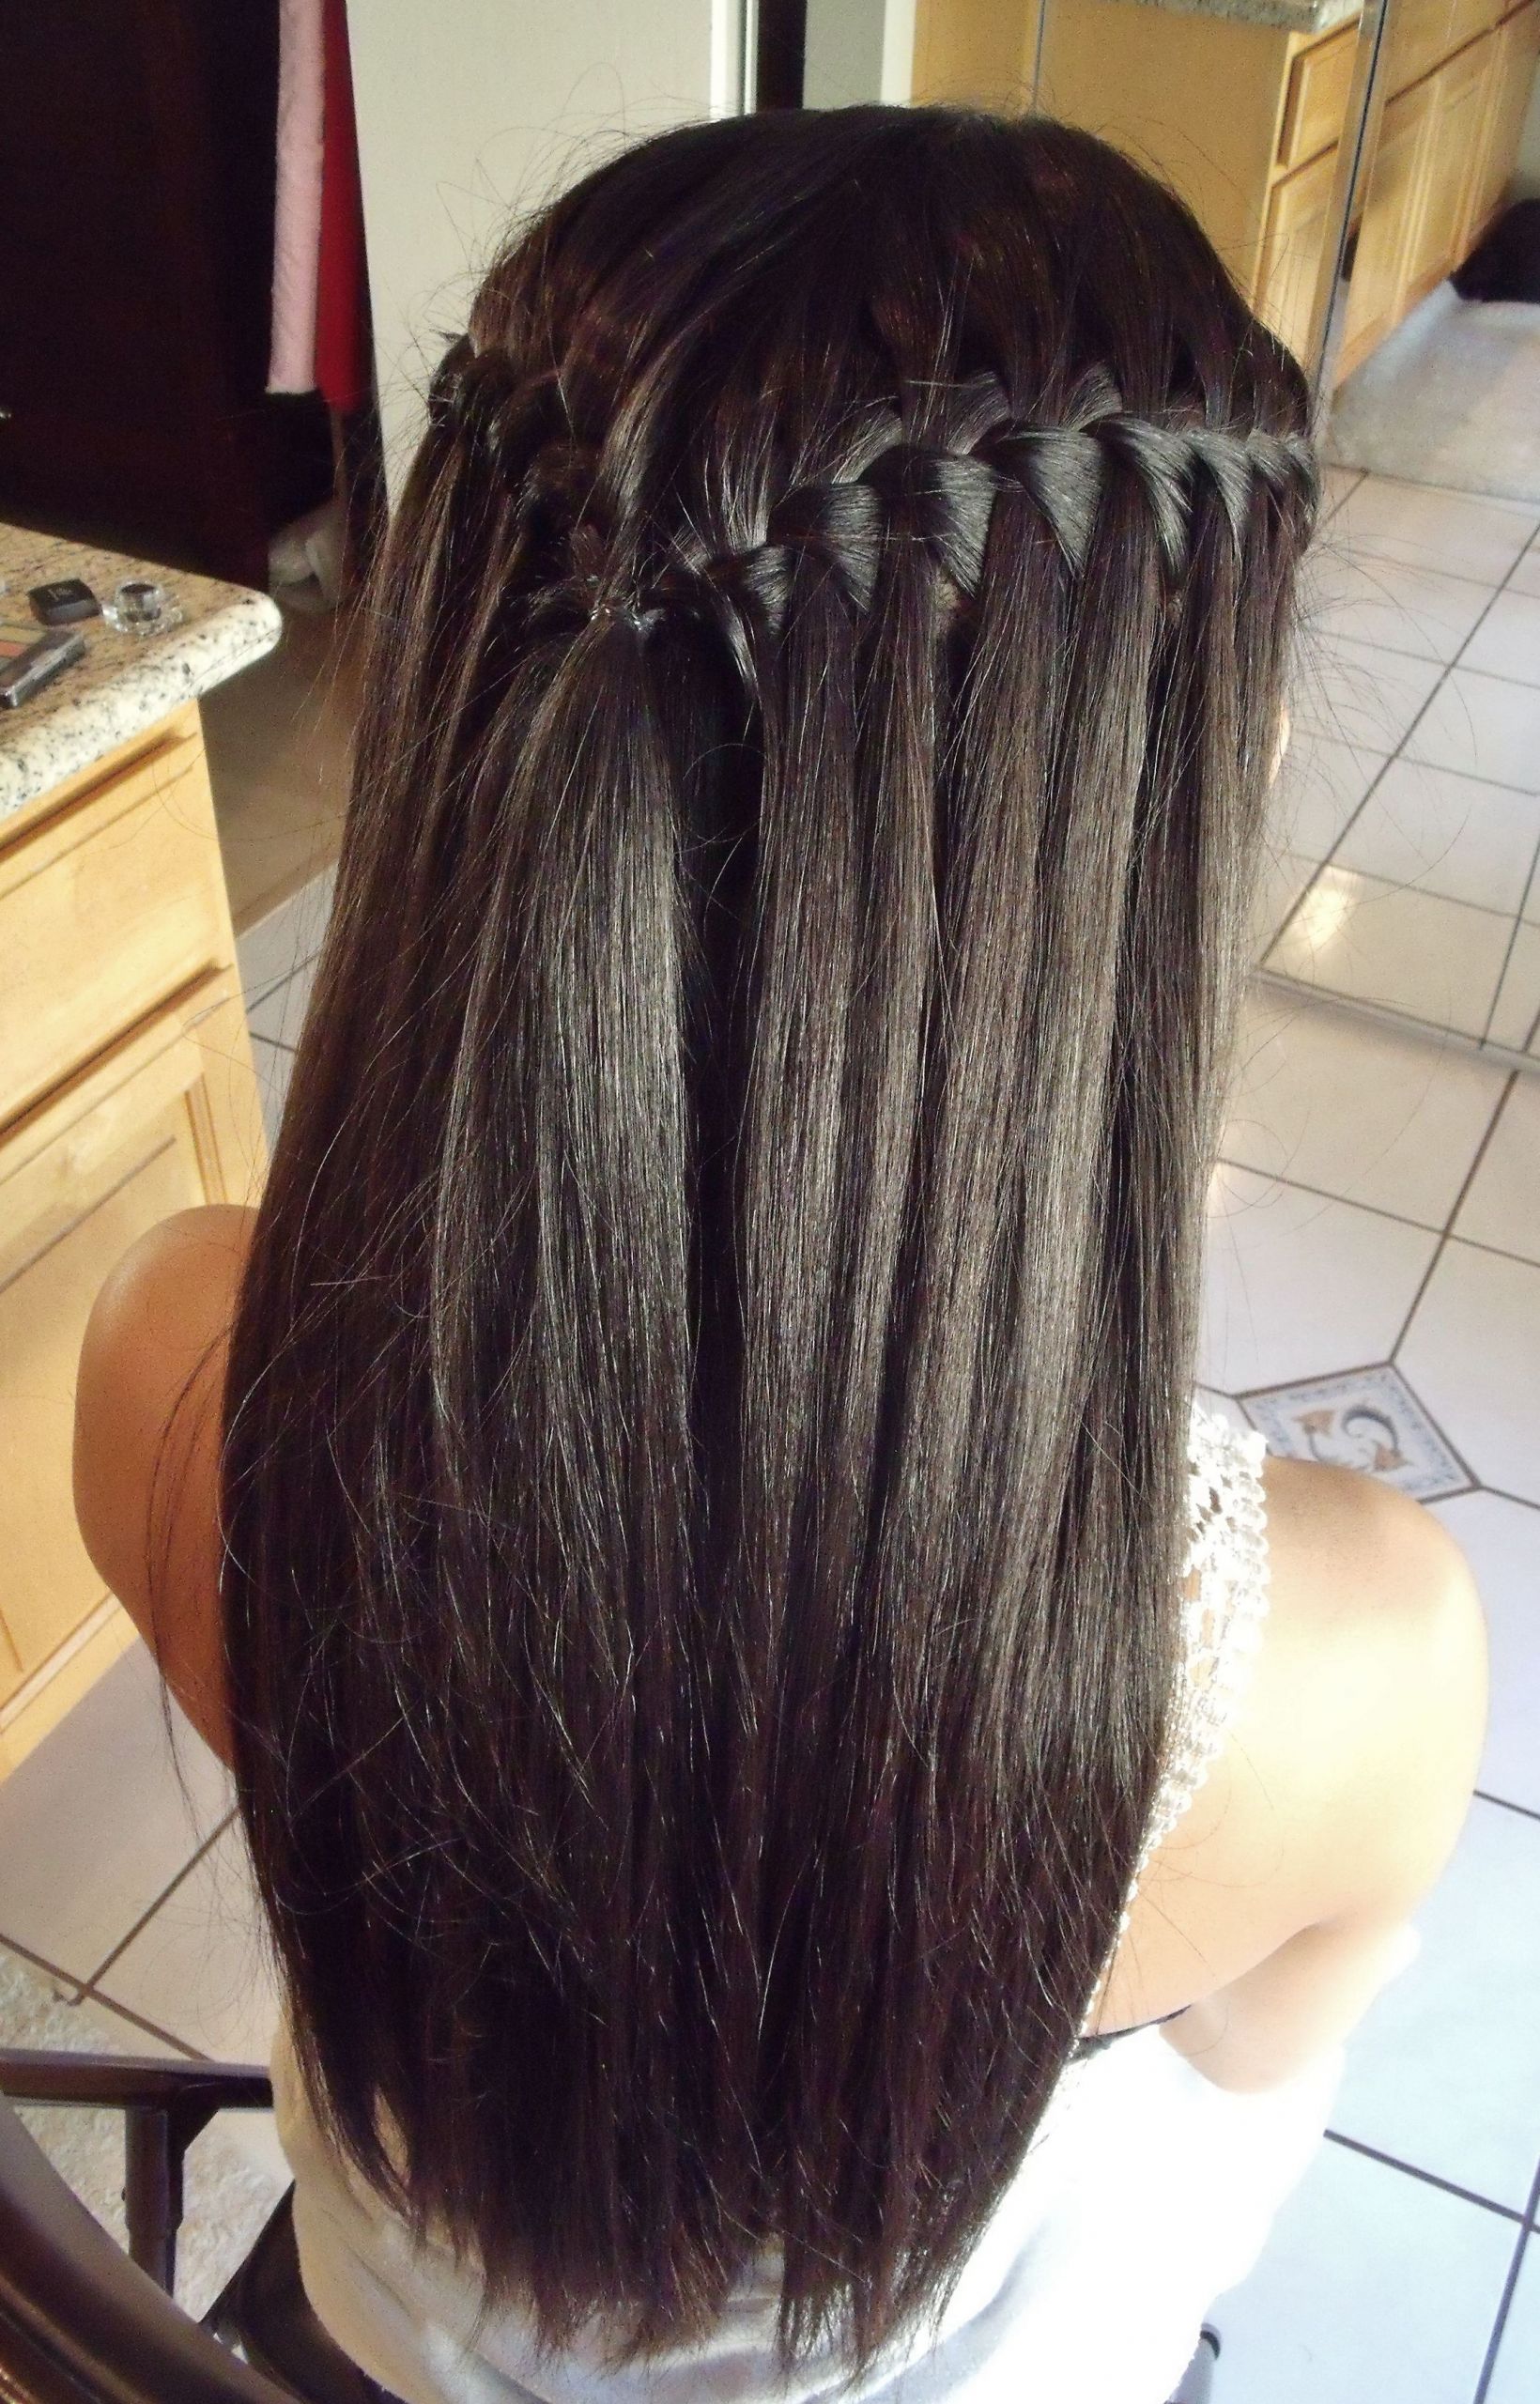 Prom Hairstyles For Straight Hair
 This hairstyle is parted down the middle at the front